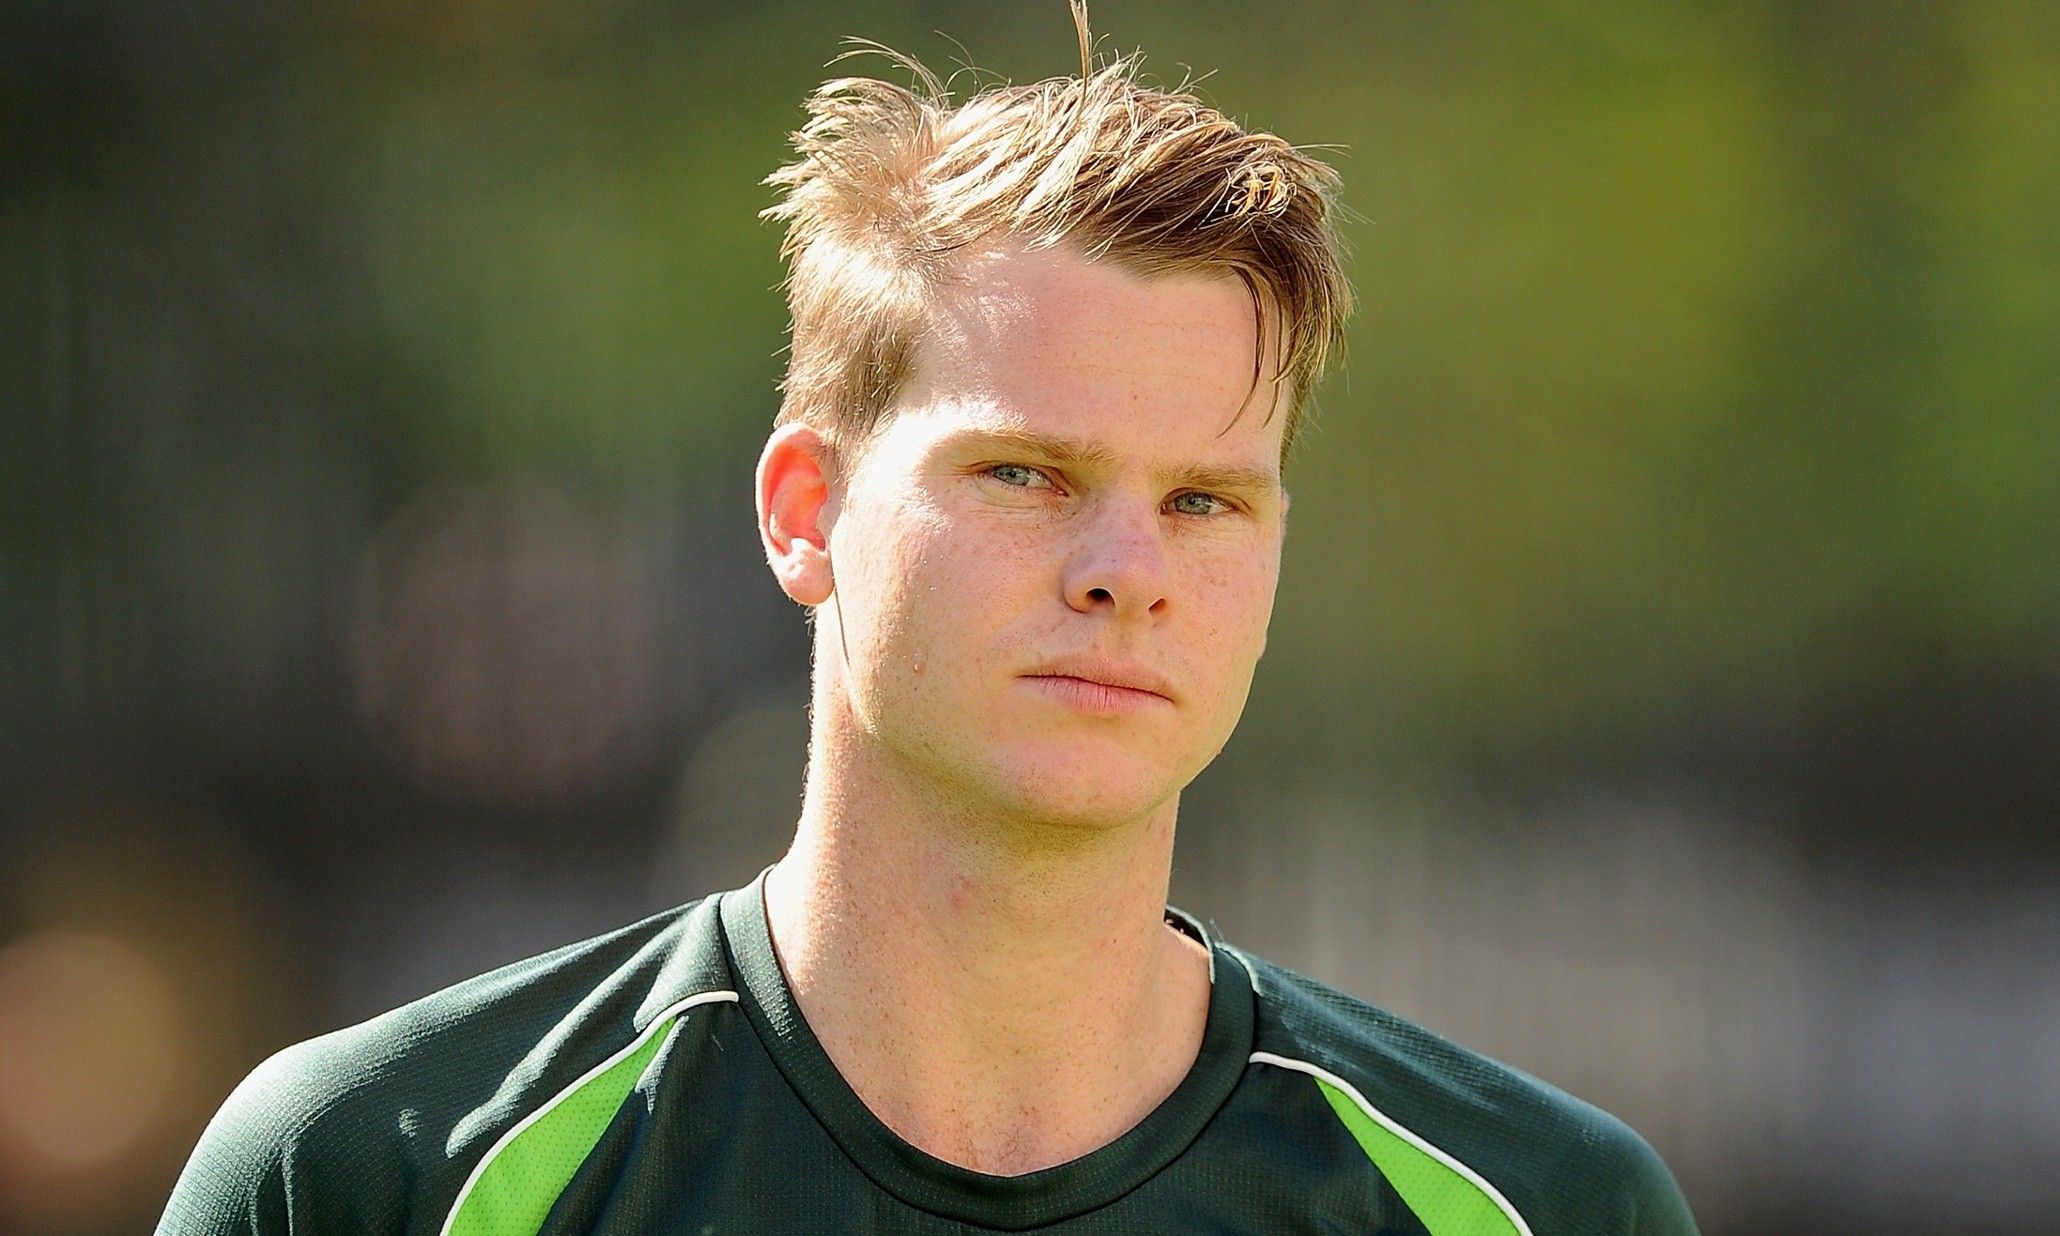 Steve Smith Hd Images Whb 3 - Steve Smith , HD Wallpaper & Backgrounds